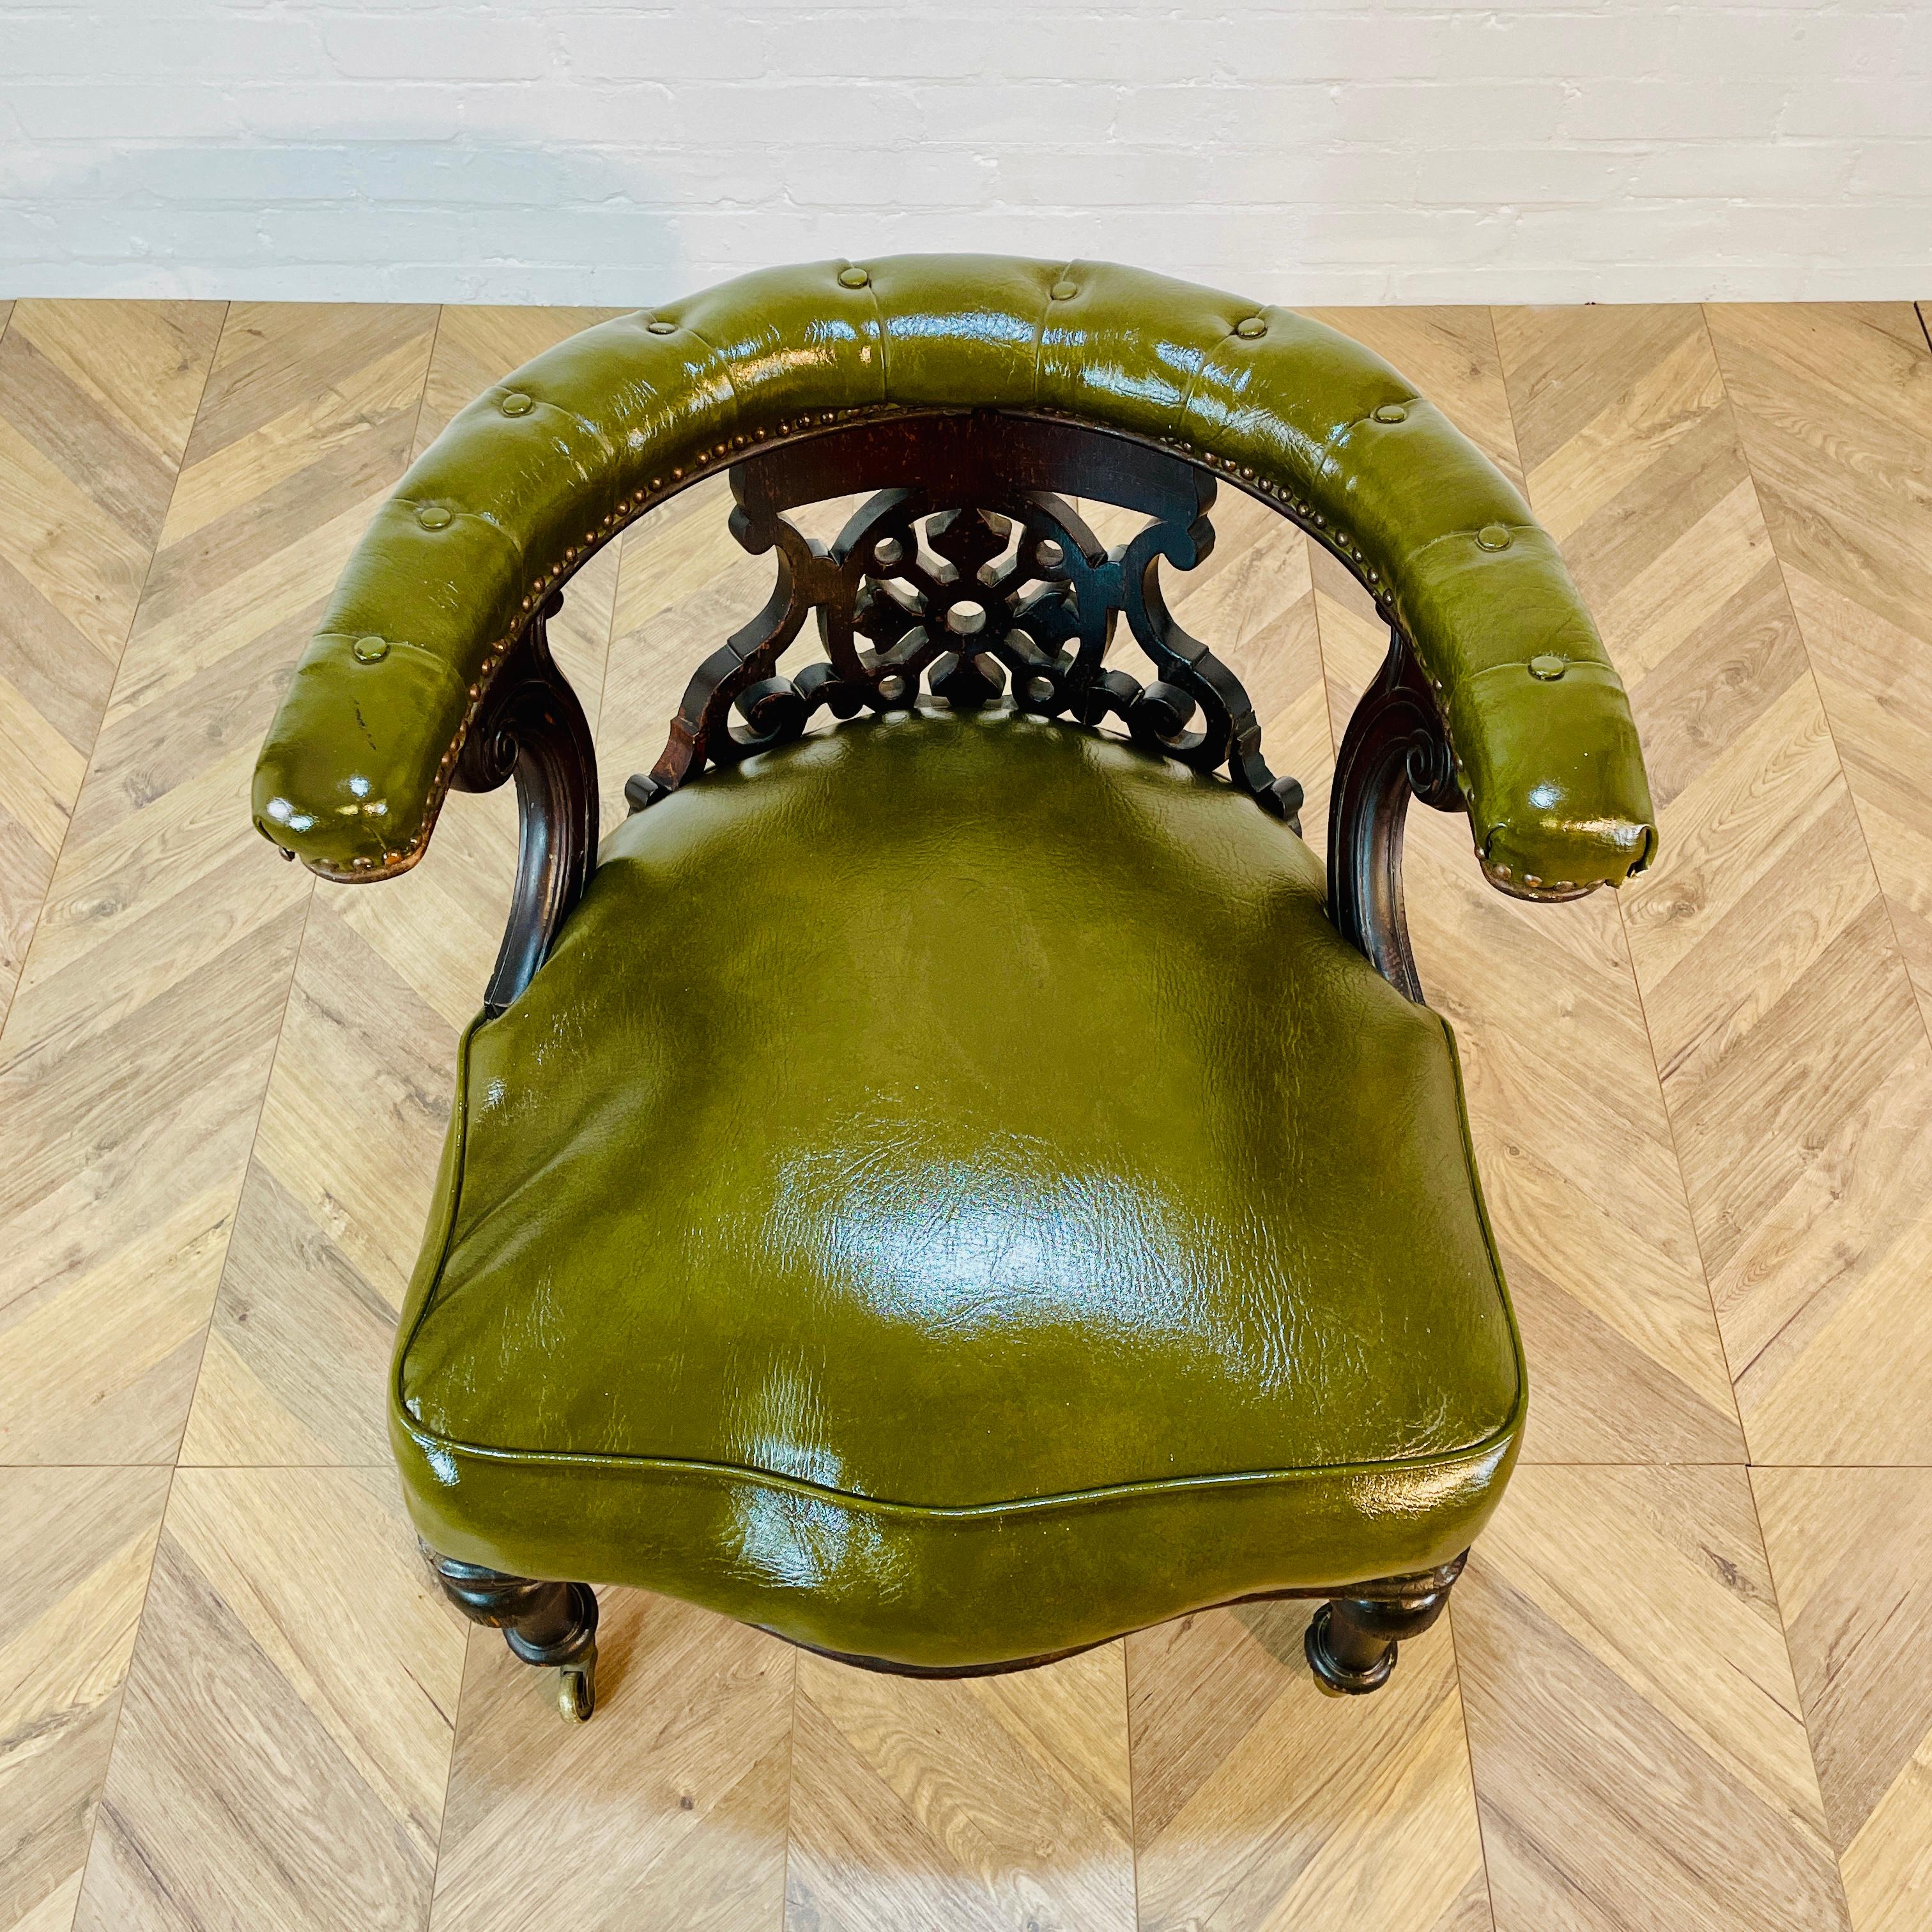 A Good Quality Antique English Mahogany & Green Leather Library / Desk Chair on Brass Castors, circa 19th Century.

The chair is super comfortable and the leather upholstery is in very good condition with no rips or tears.

The chair does show small